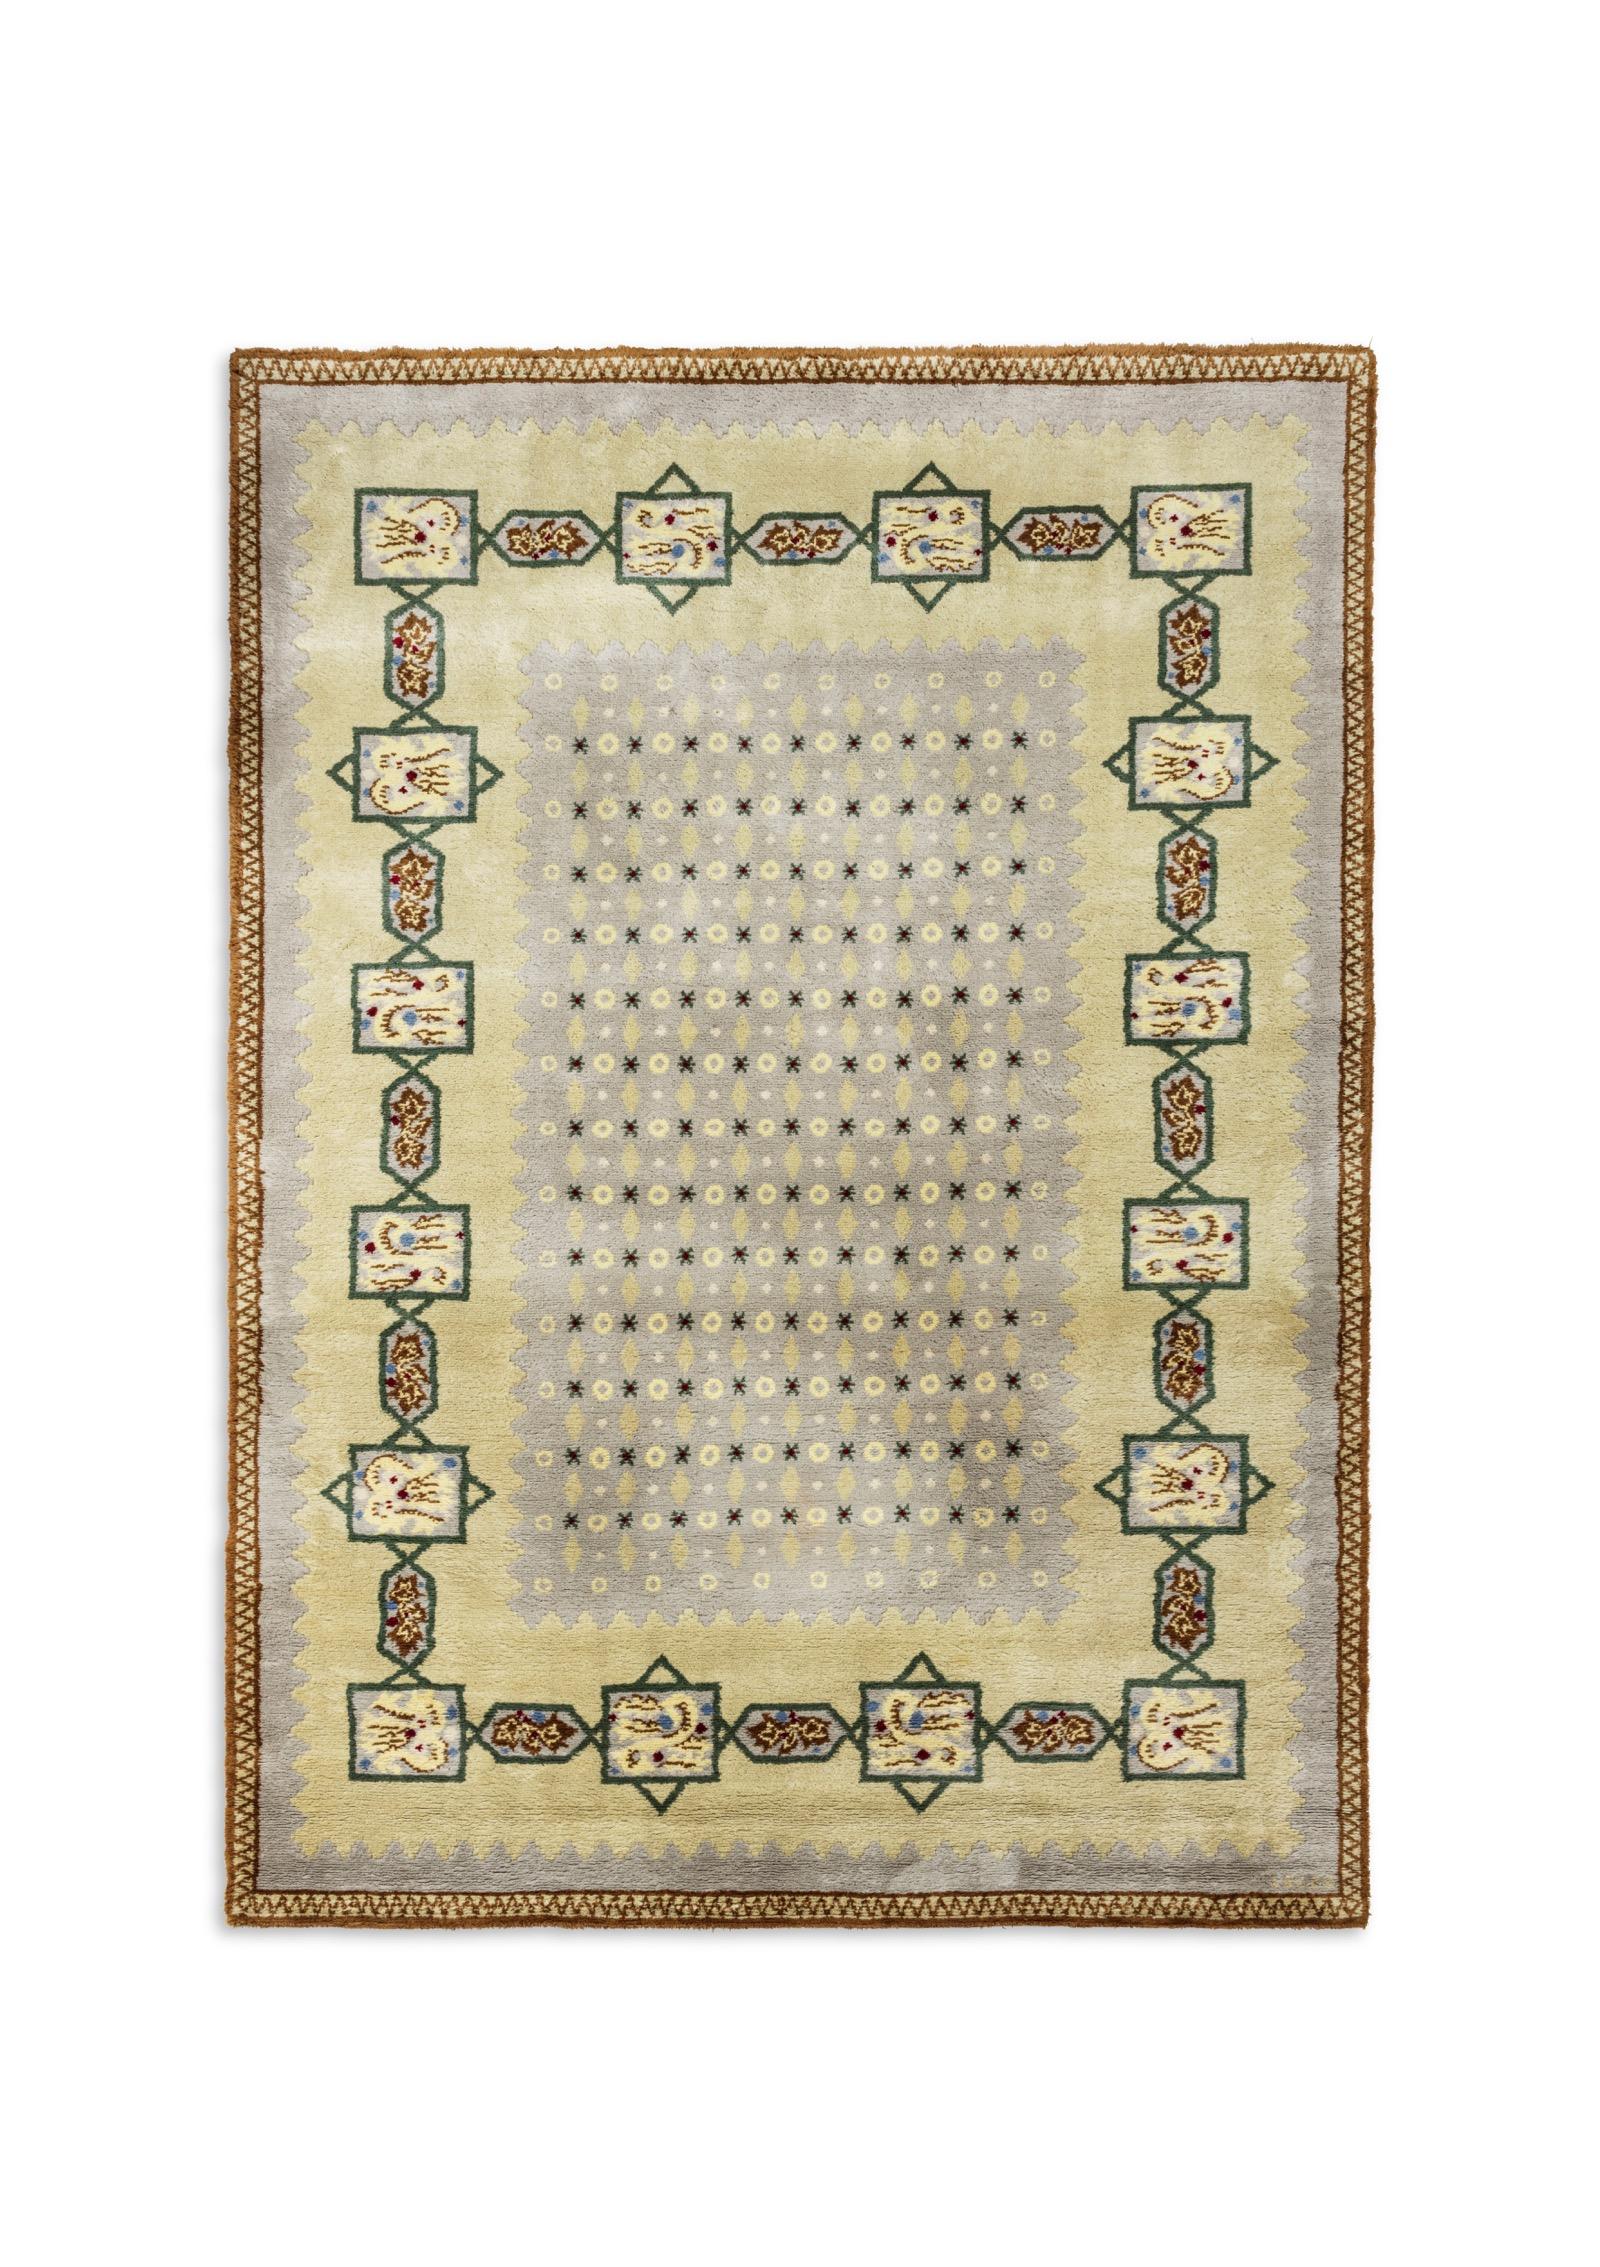 A rectangular knotted woollen rug with geometric decoration and stylized green and brown on a sky blue background. Signed in the frame.